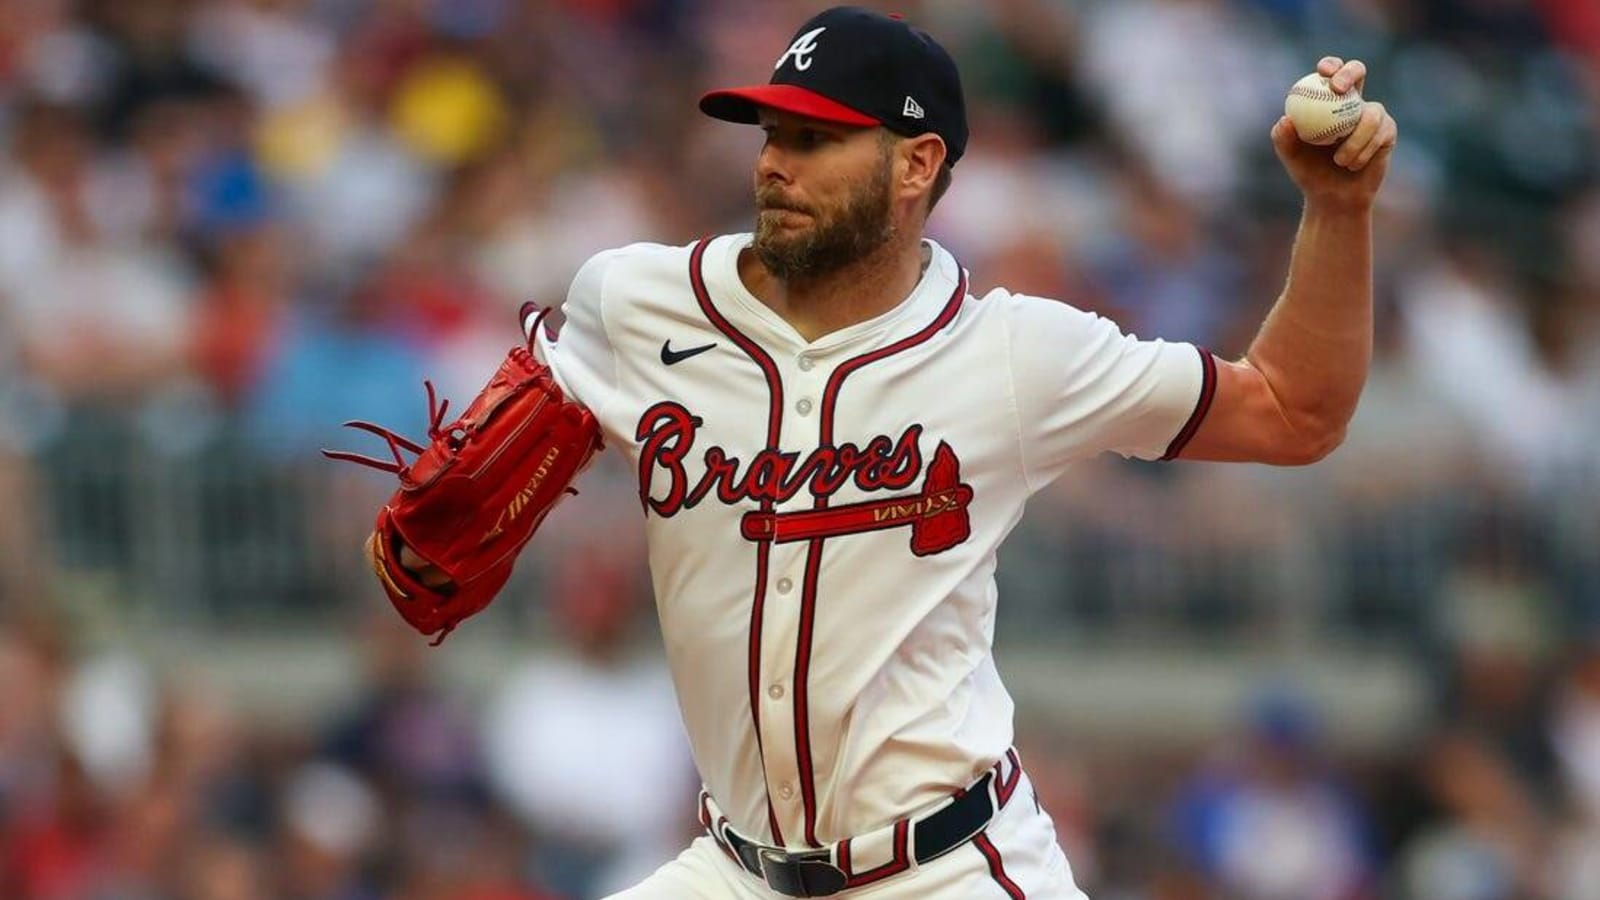 Cubs, Braves look for more strong pitching